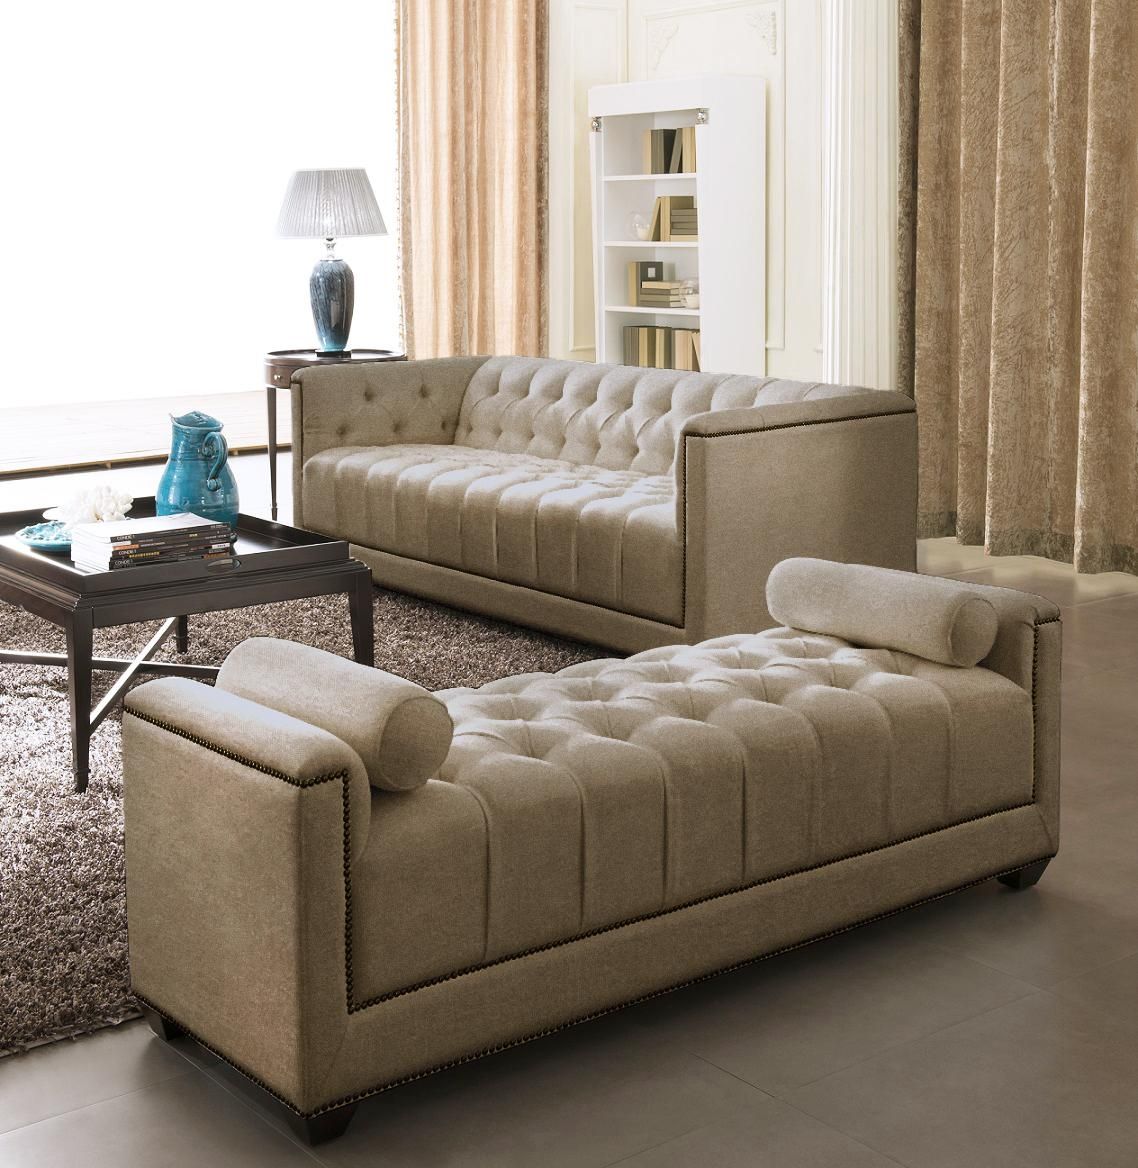 Furniture: Inspiring Living Room Design With Contemporary Sofas With Contemporary Sofas And Chairs (View 18 of 20)